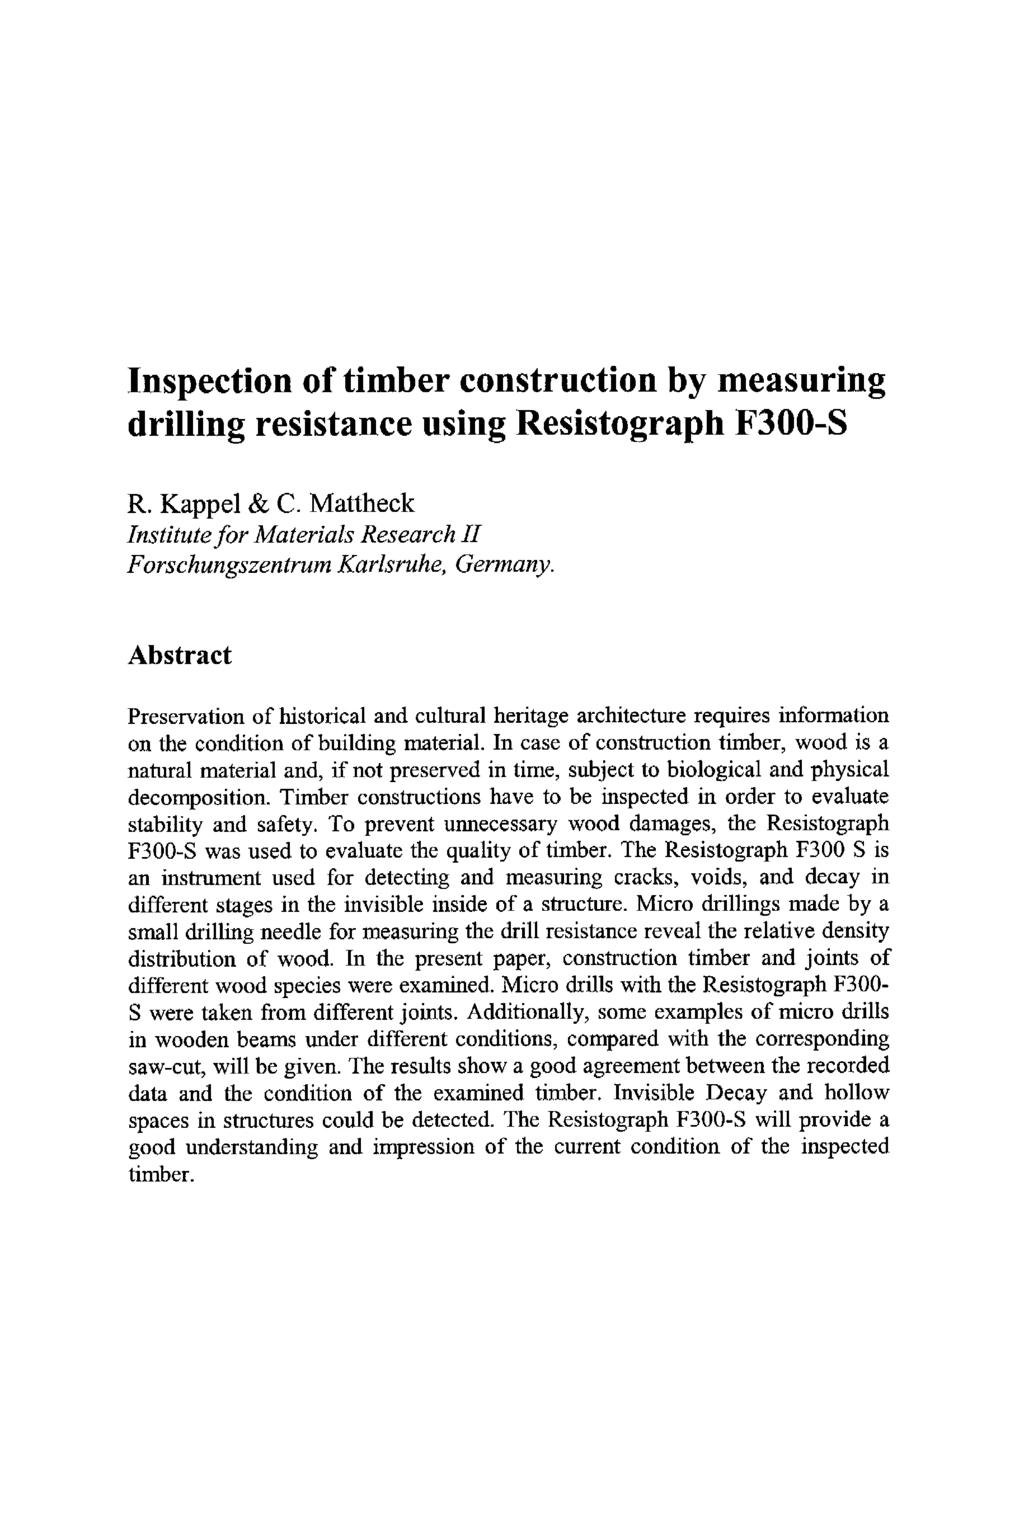 Inspection of timber construction by measuring drilling resistance using Resistograph F300-S R. Kappel & C. Mattheck Institute for Materials Research II Forschungszentrum Kavlsvuhe, Germany.